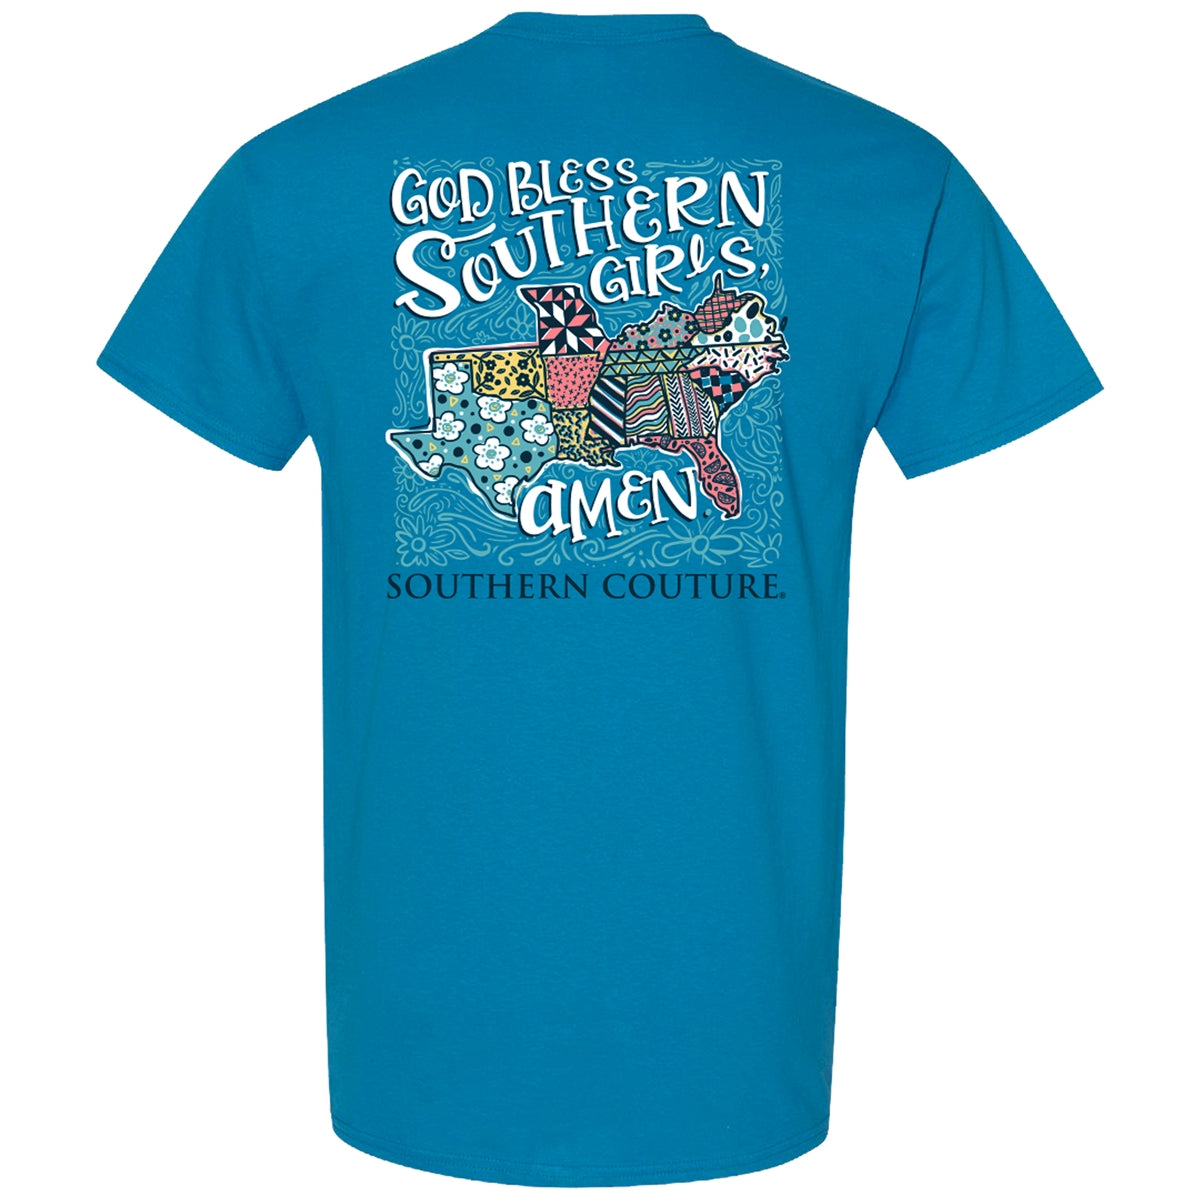 Southern Couture Classic God Bless Southern Girls T-Shirt